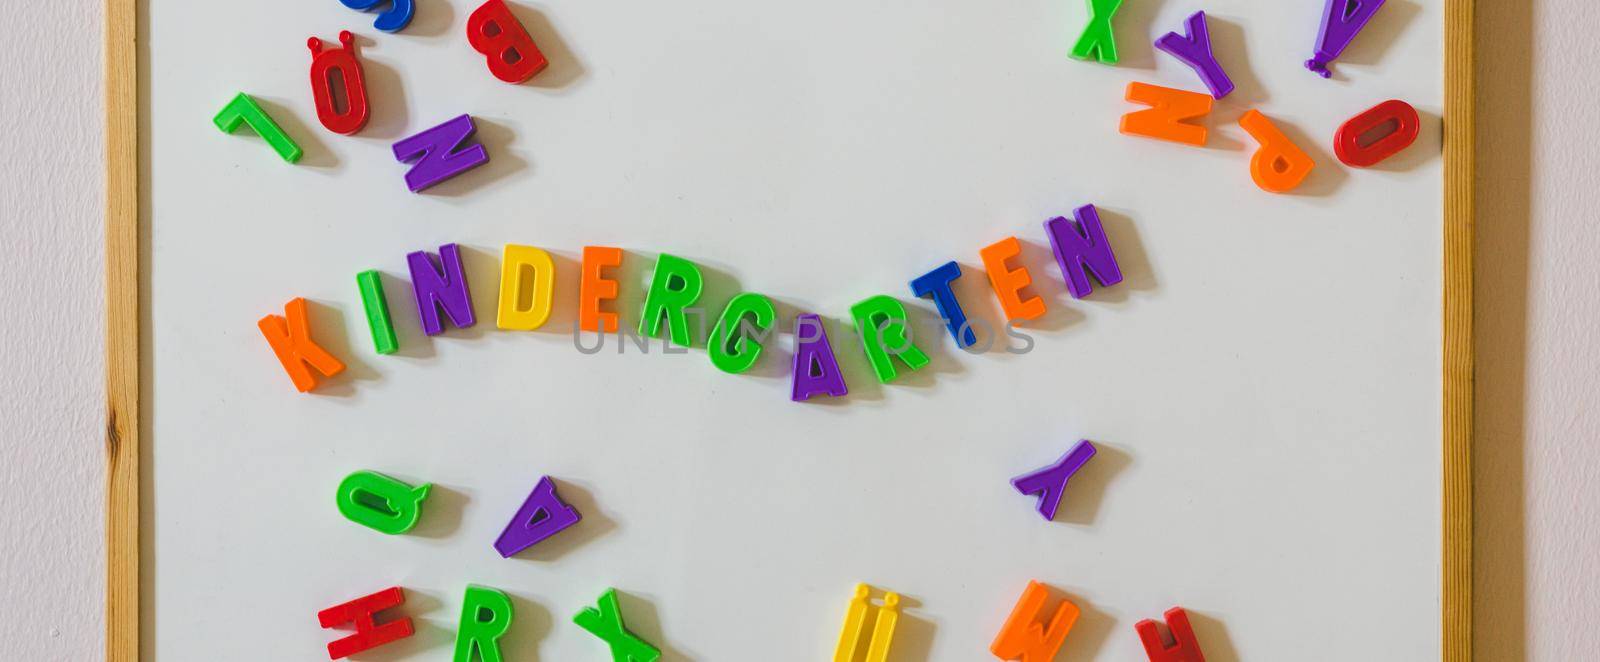 “Kindergarten” concept: Colorful letters and the word “Kindergarten” by Daxenbichler